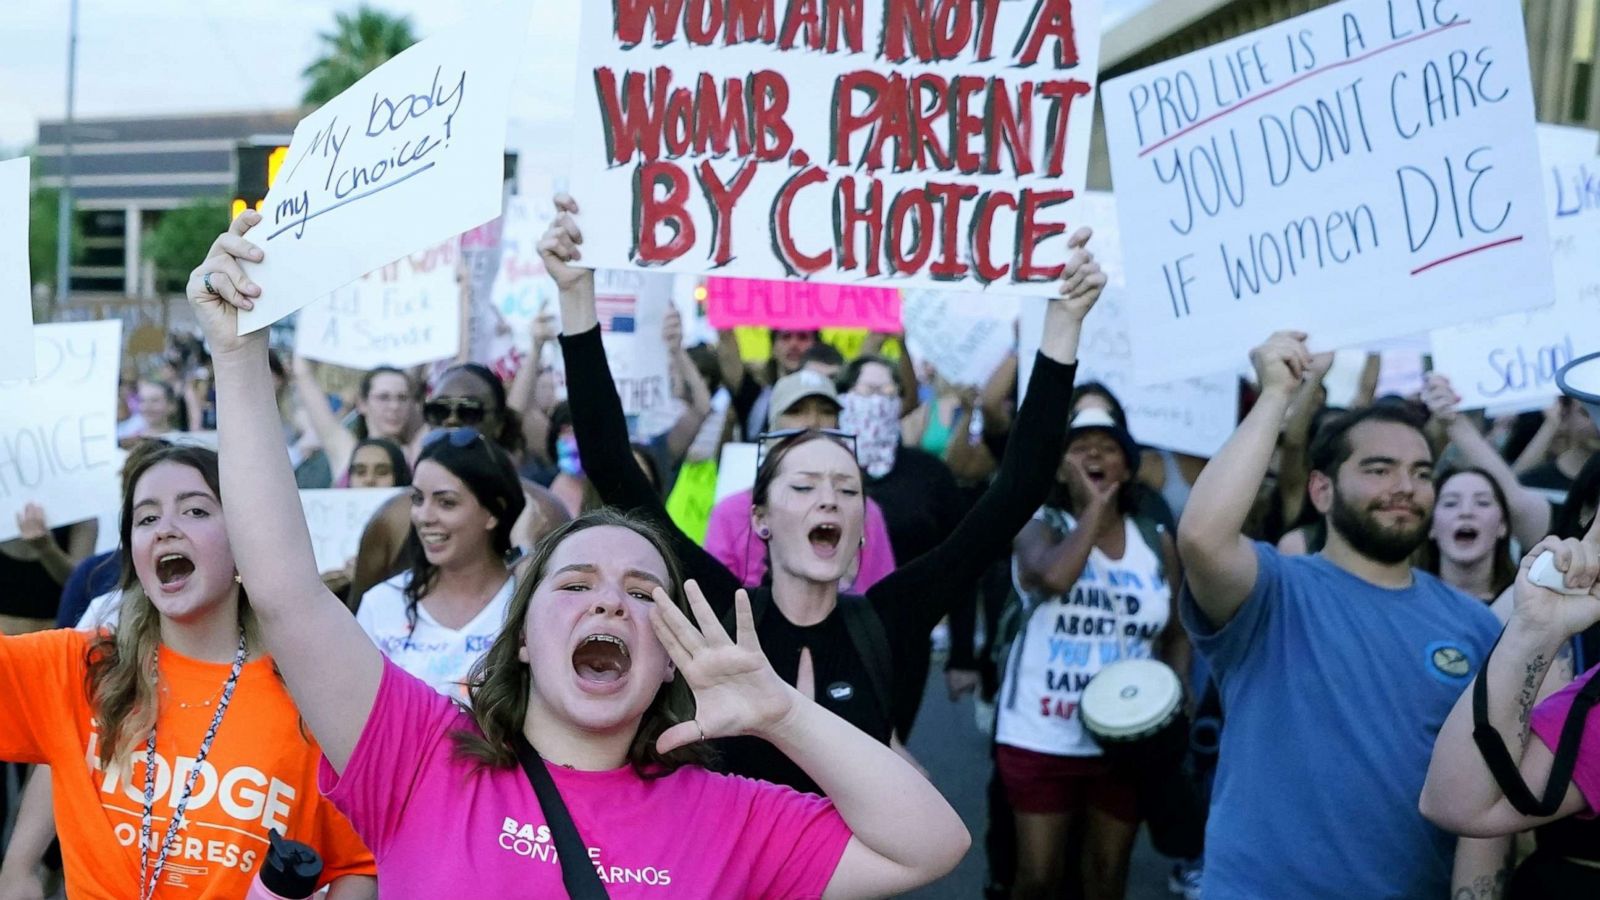 The Abortion Bans of The States of Ohio and Arizona Have Been Temporarily Blocked By Judges